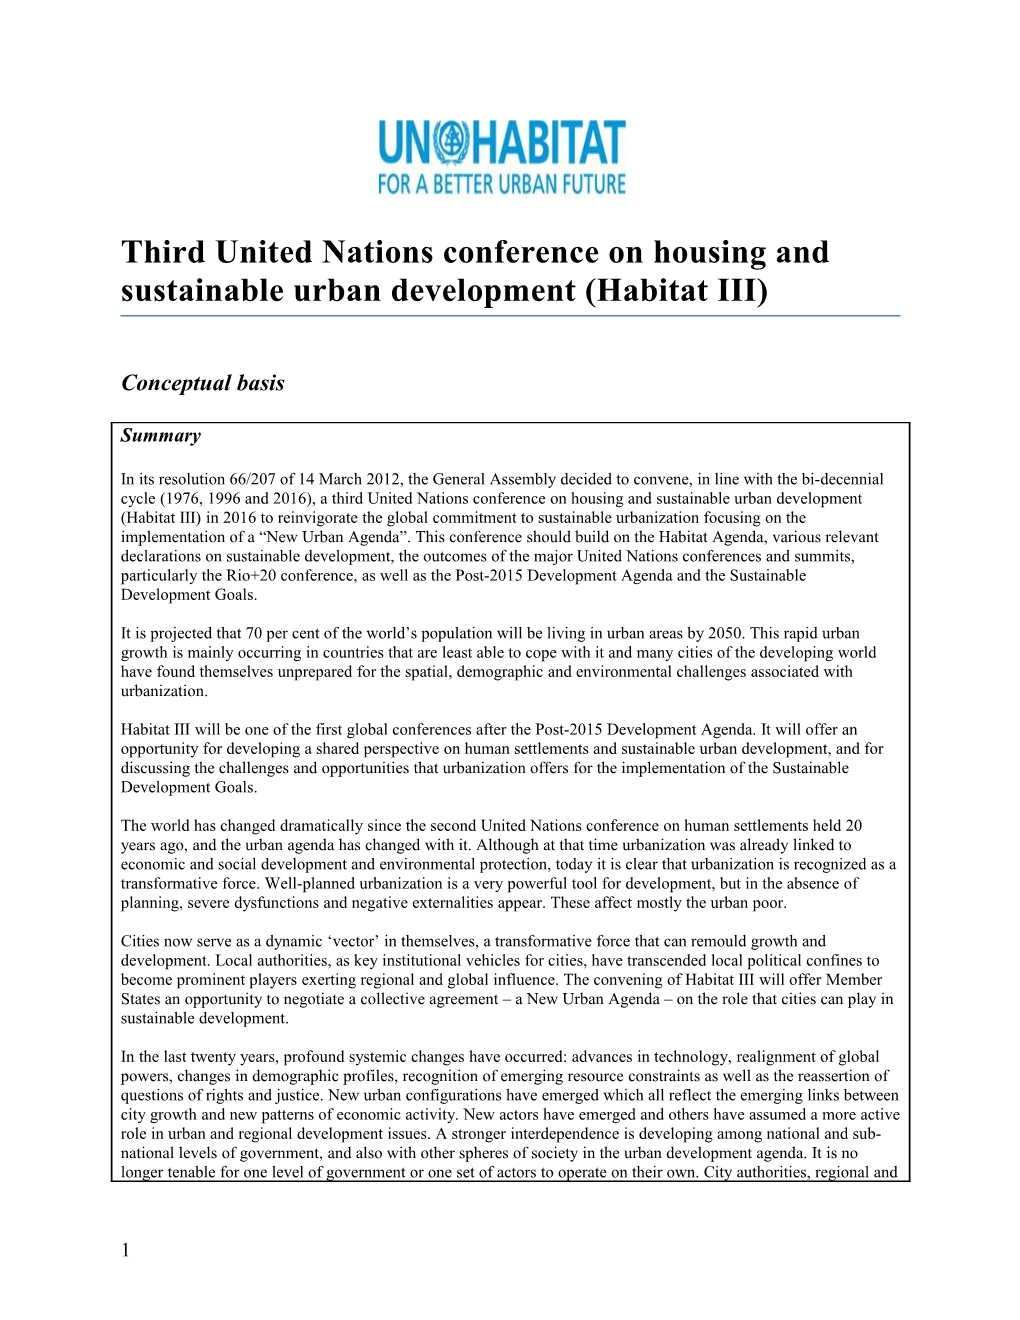 Third United Nations Conference on Housing and Sustainable Urban Development (Habitat III)